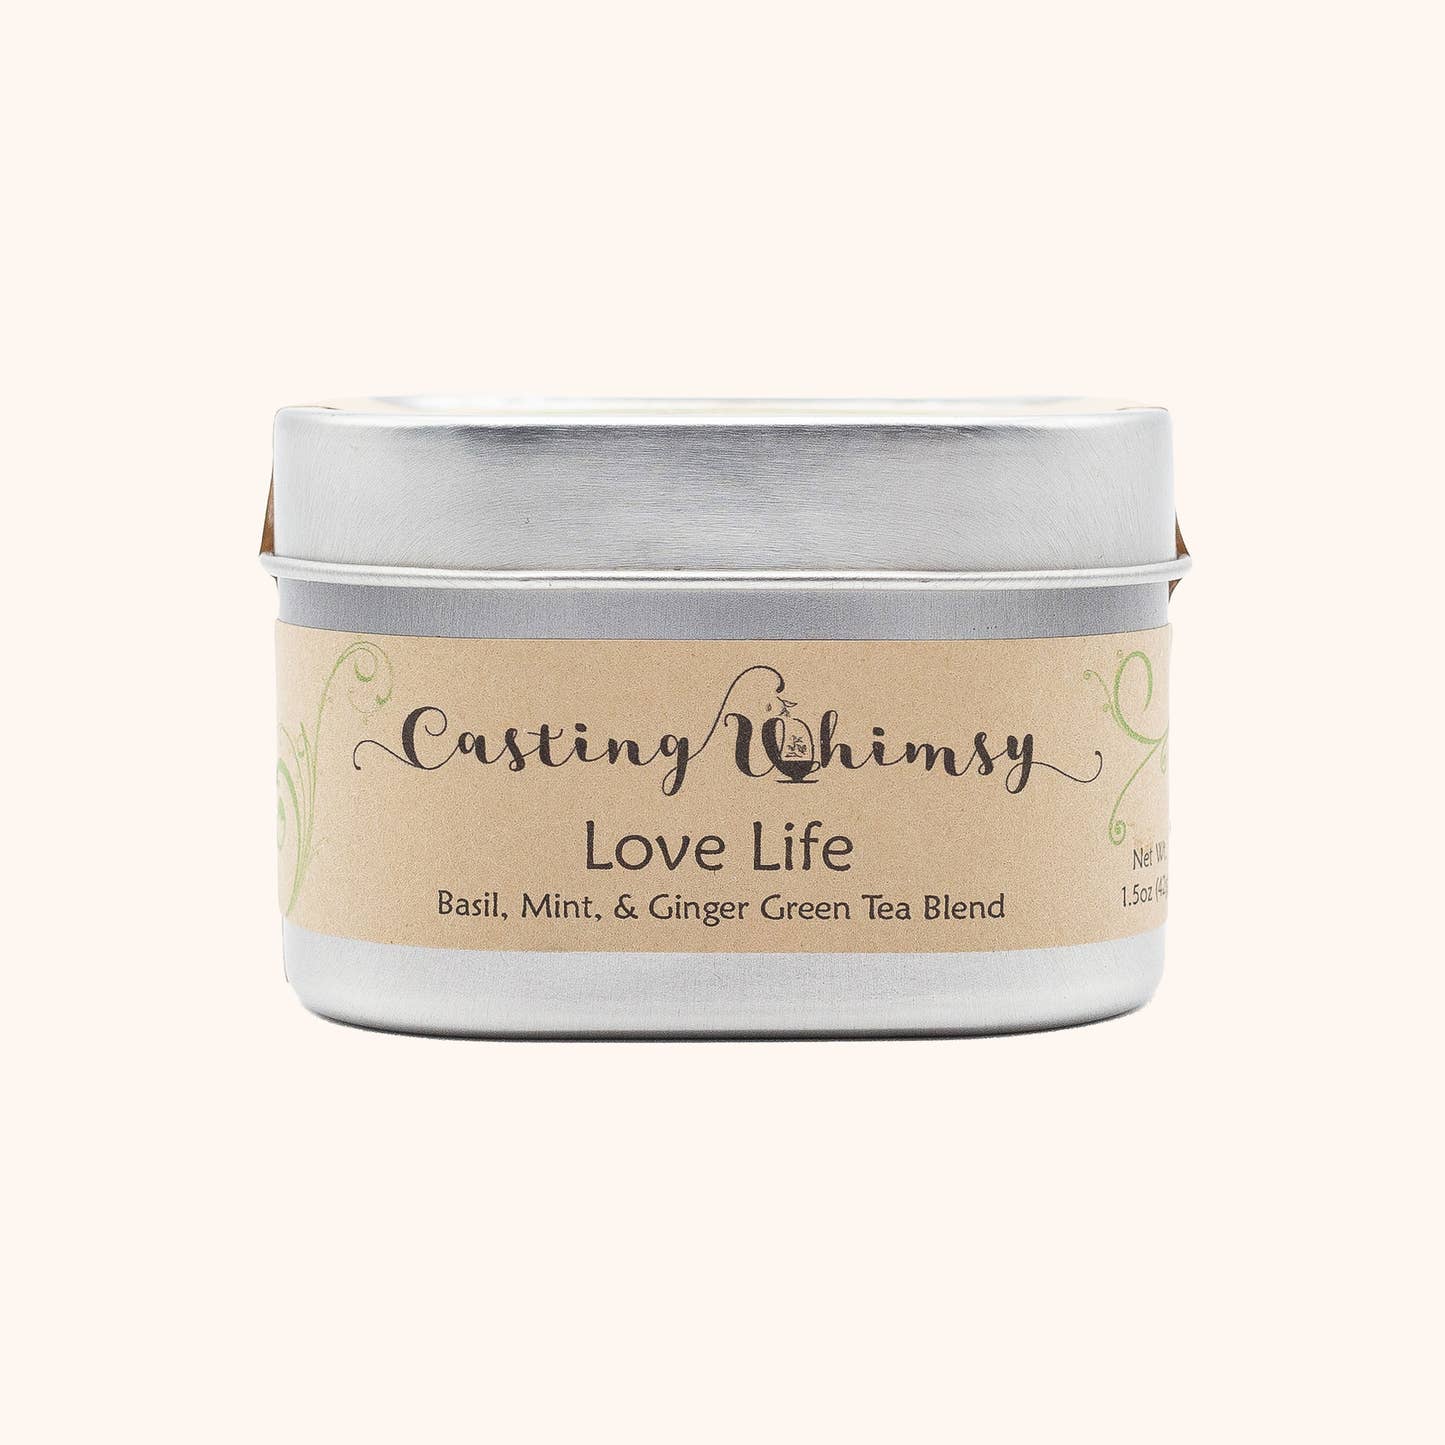 Love Life tea tin by Casting Whimsy